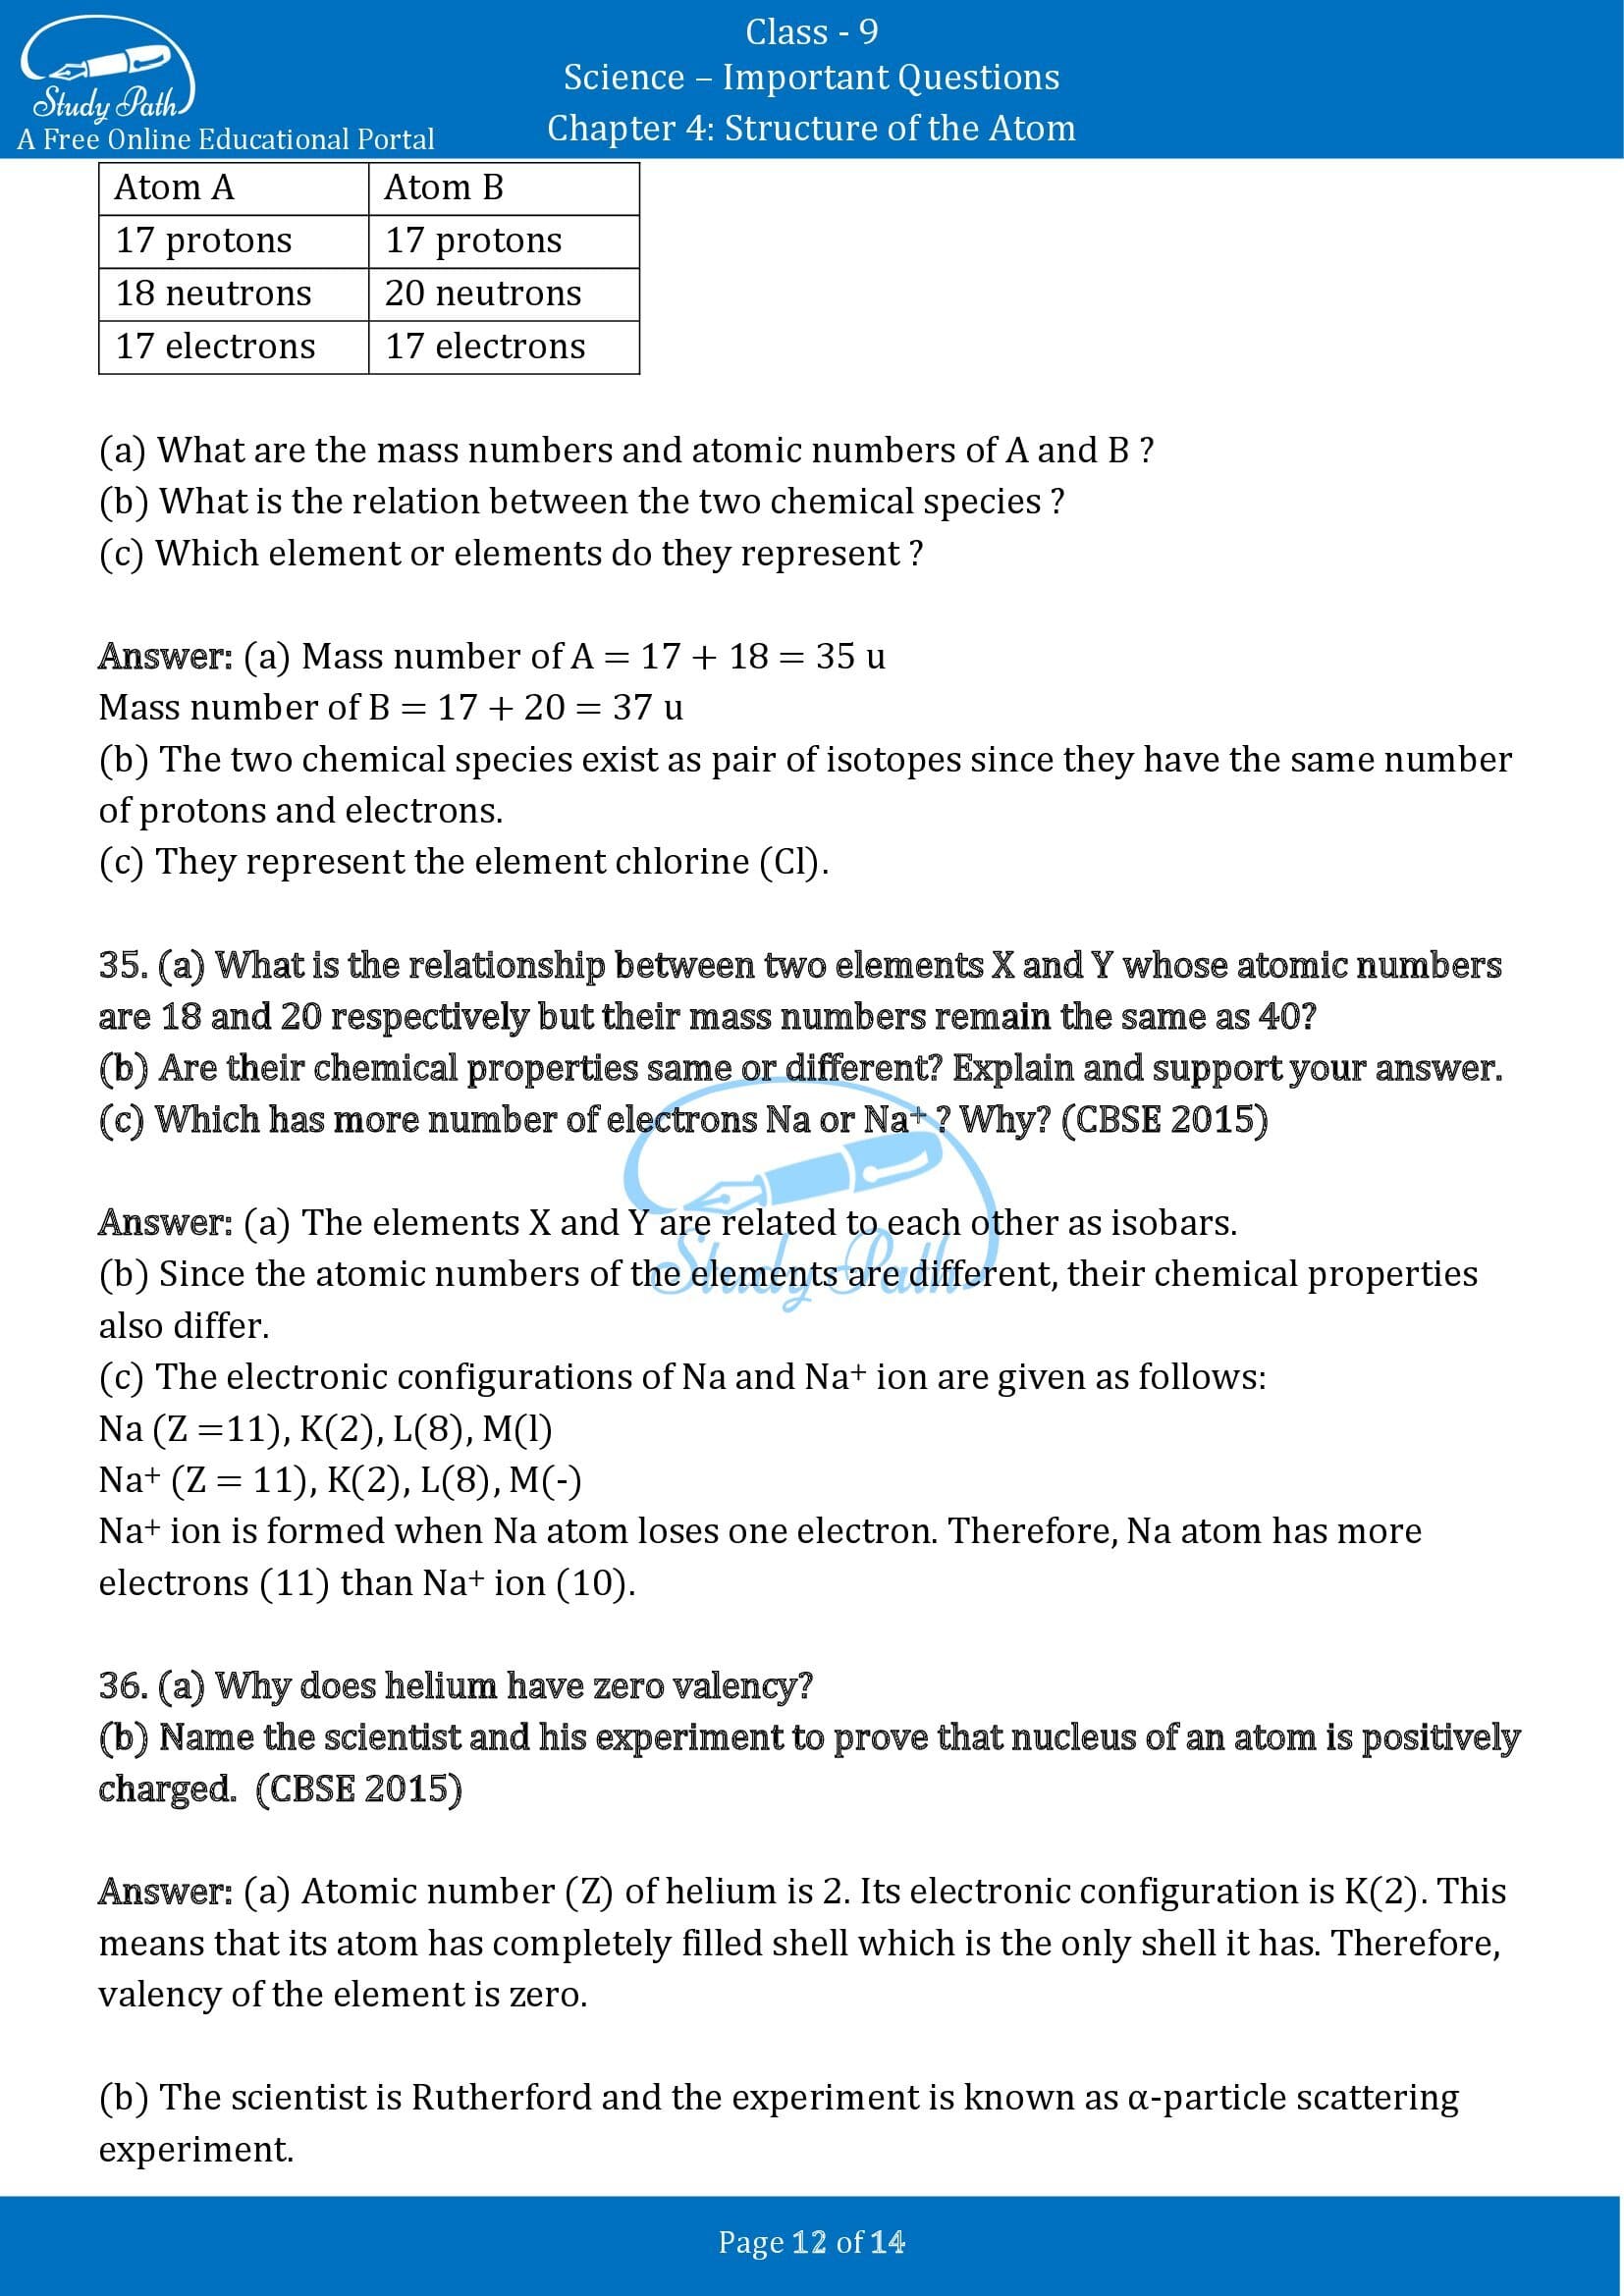 Important Questions for Class 9 Science Chapter 4 Structure of the Atom 00012